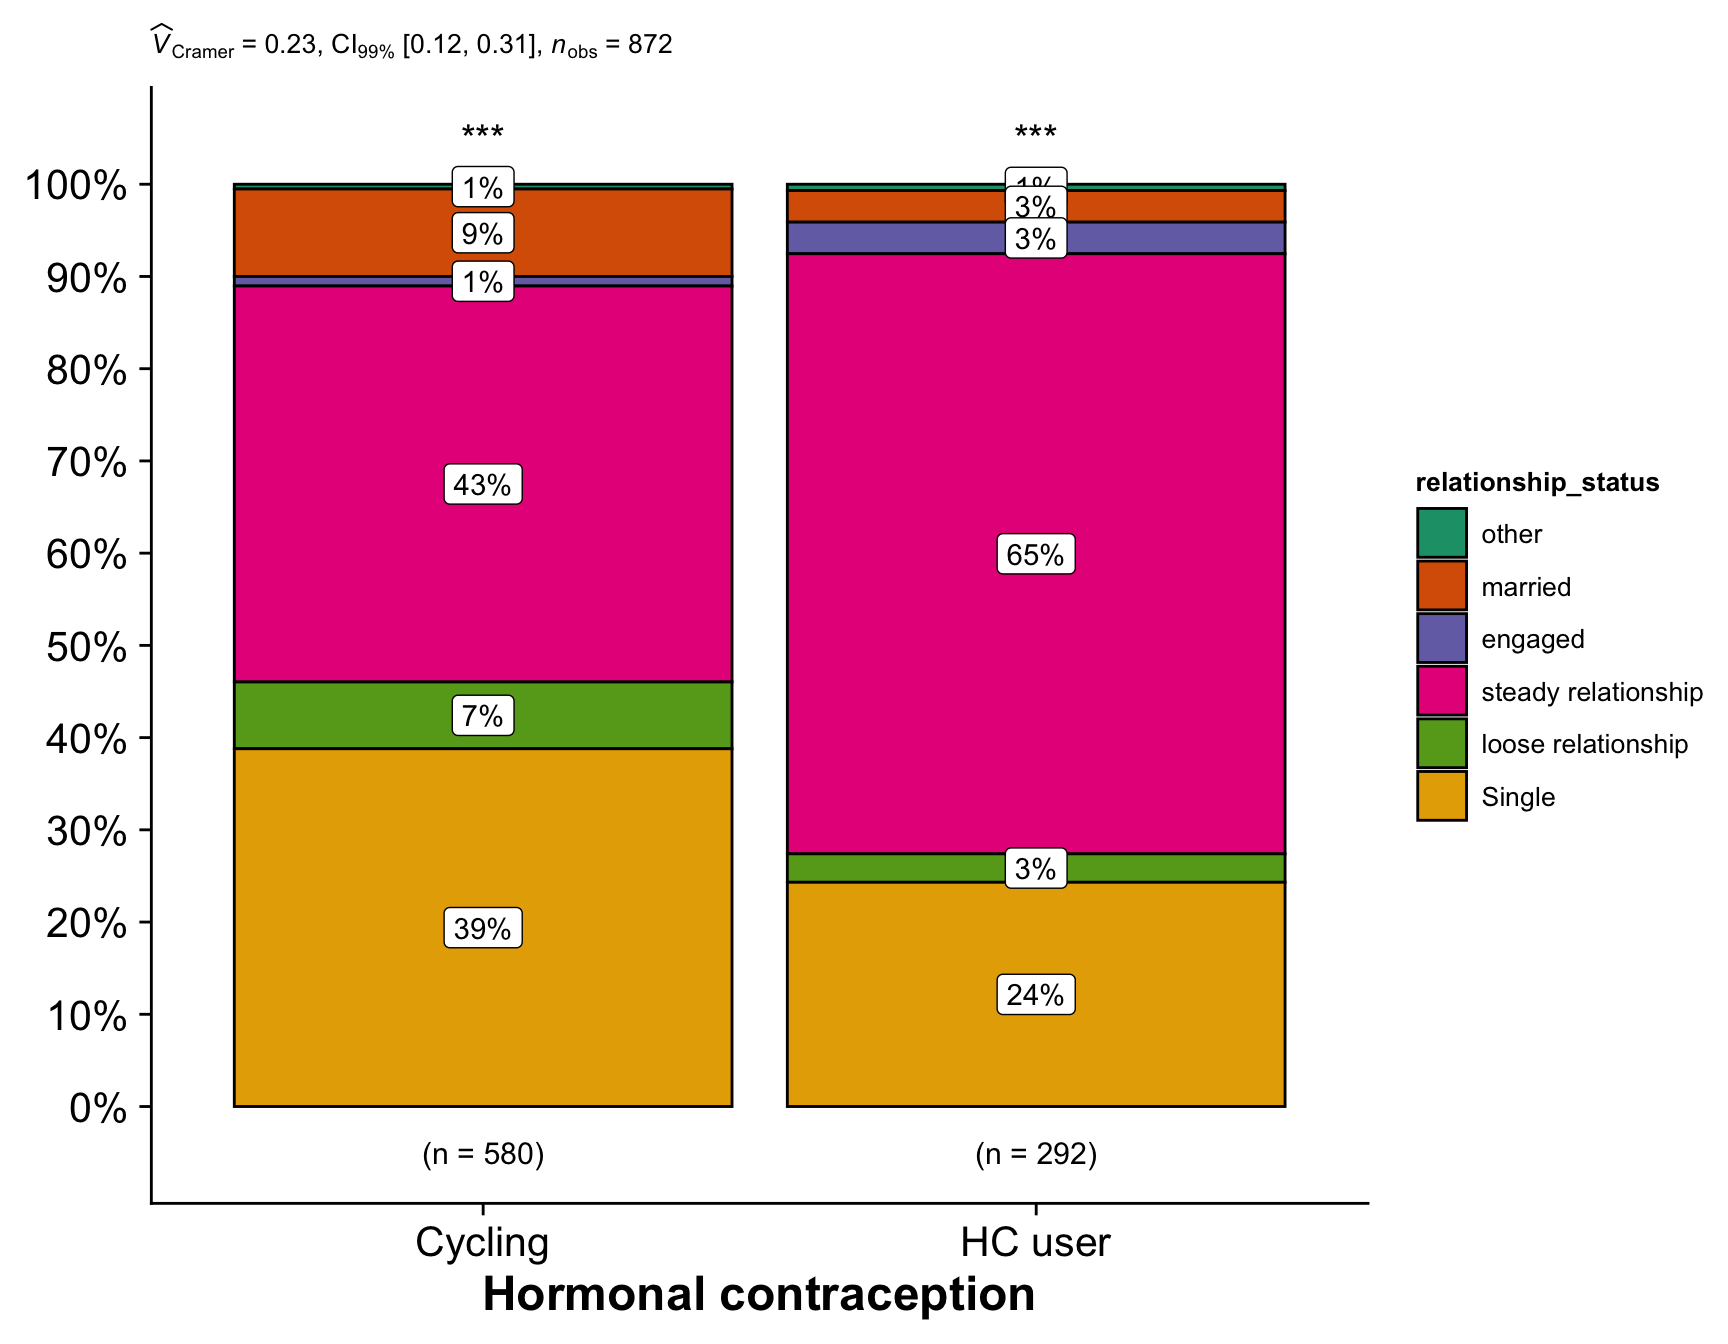 Comparison of the hormonal contraception users (our quasi-control group) with women who are regularly cycling. The plot shows the distribution of categories in each group and the results of a Chi-Square test for equal distribution.